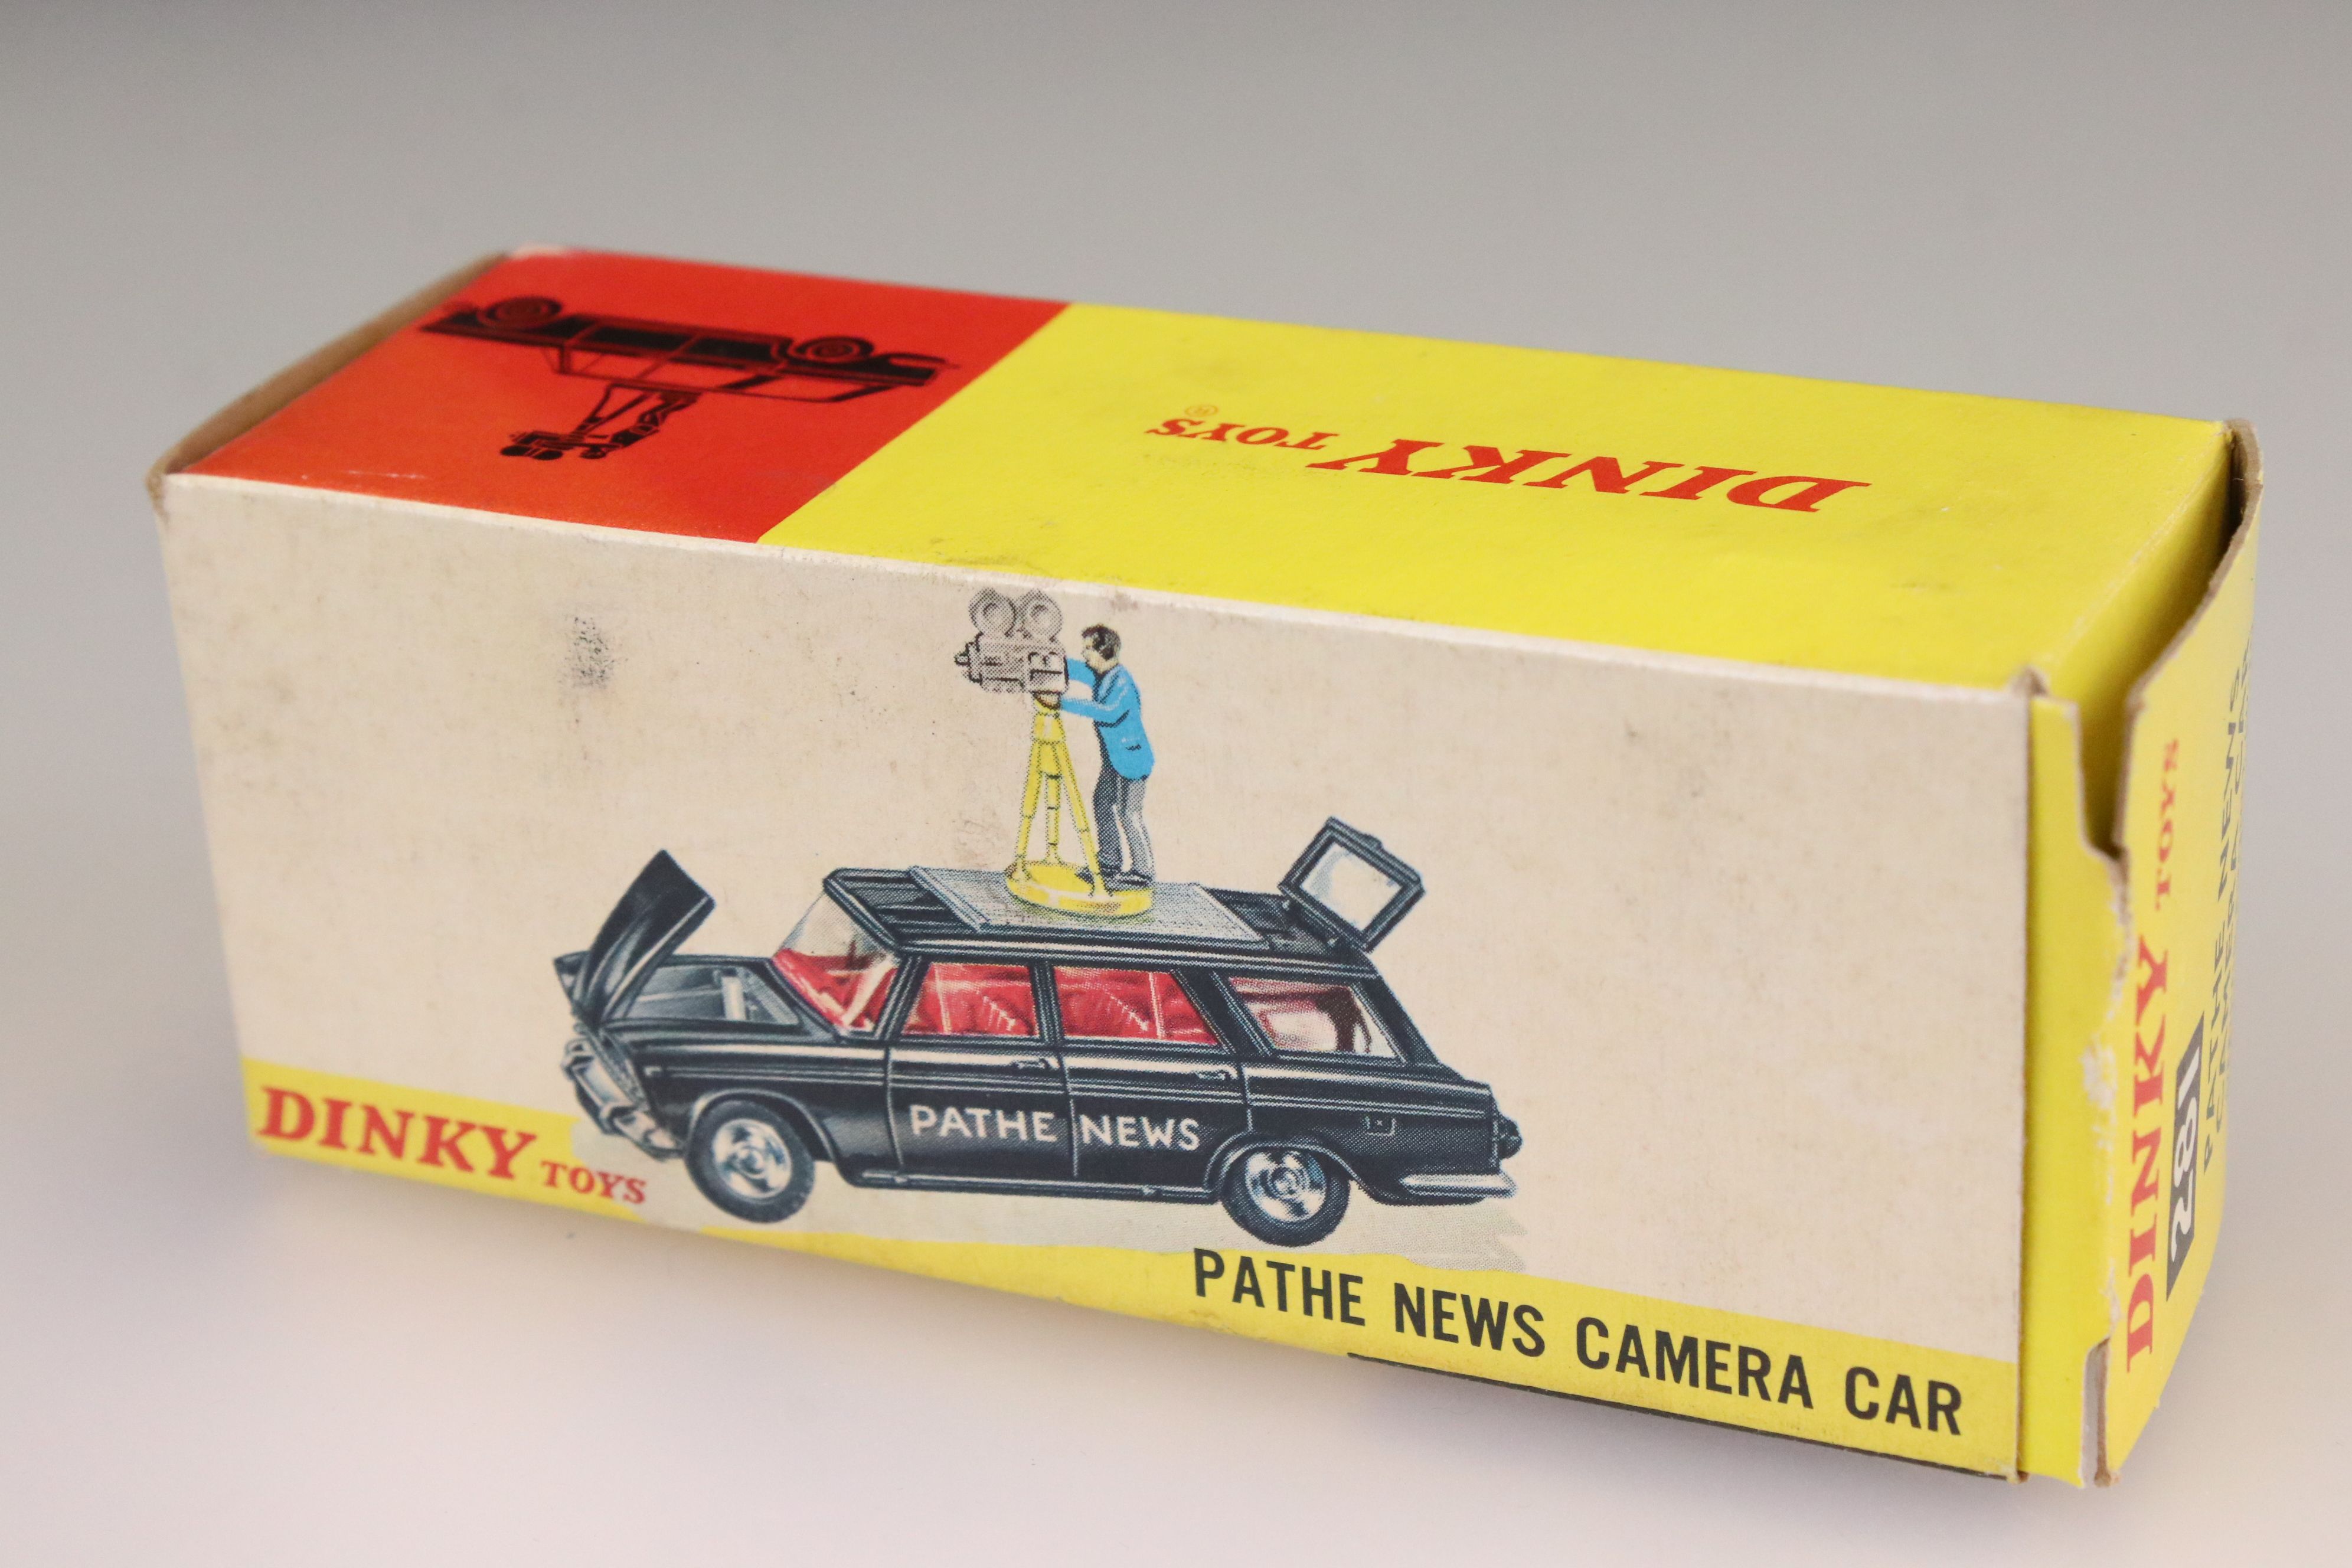 Boxed Dinky 281 Pathe News Camera Car diecast model complete with cameraman figure, diecast & decals - Image 8 of 12